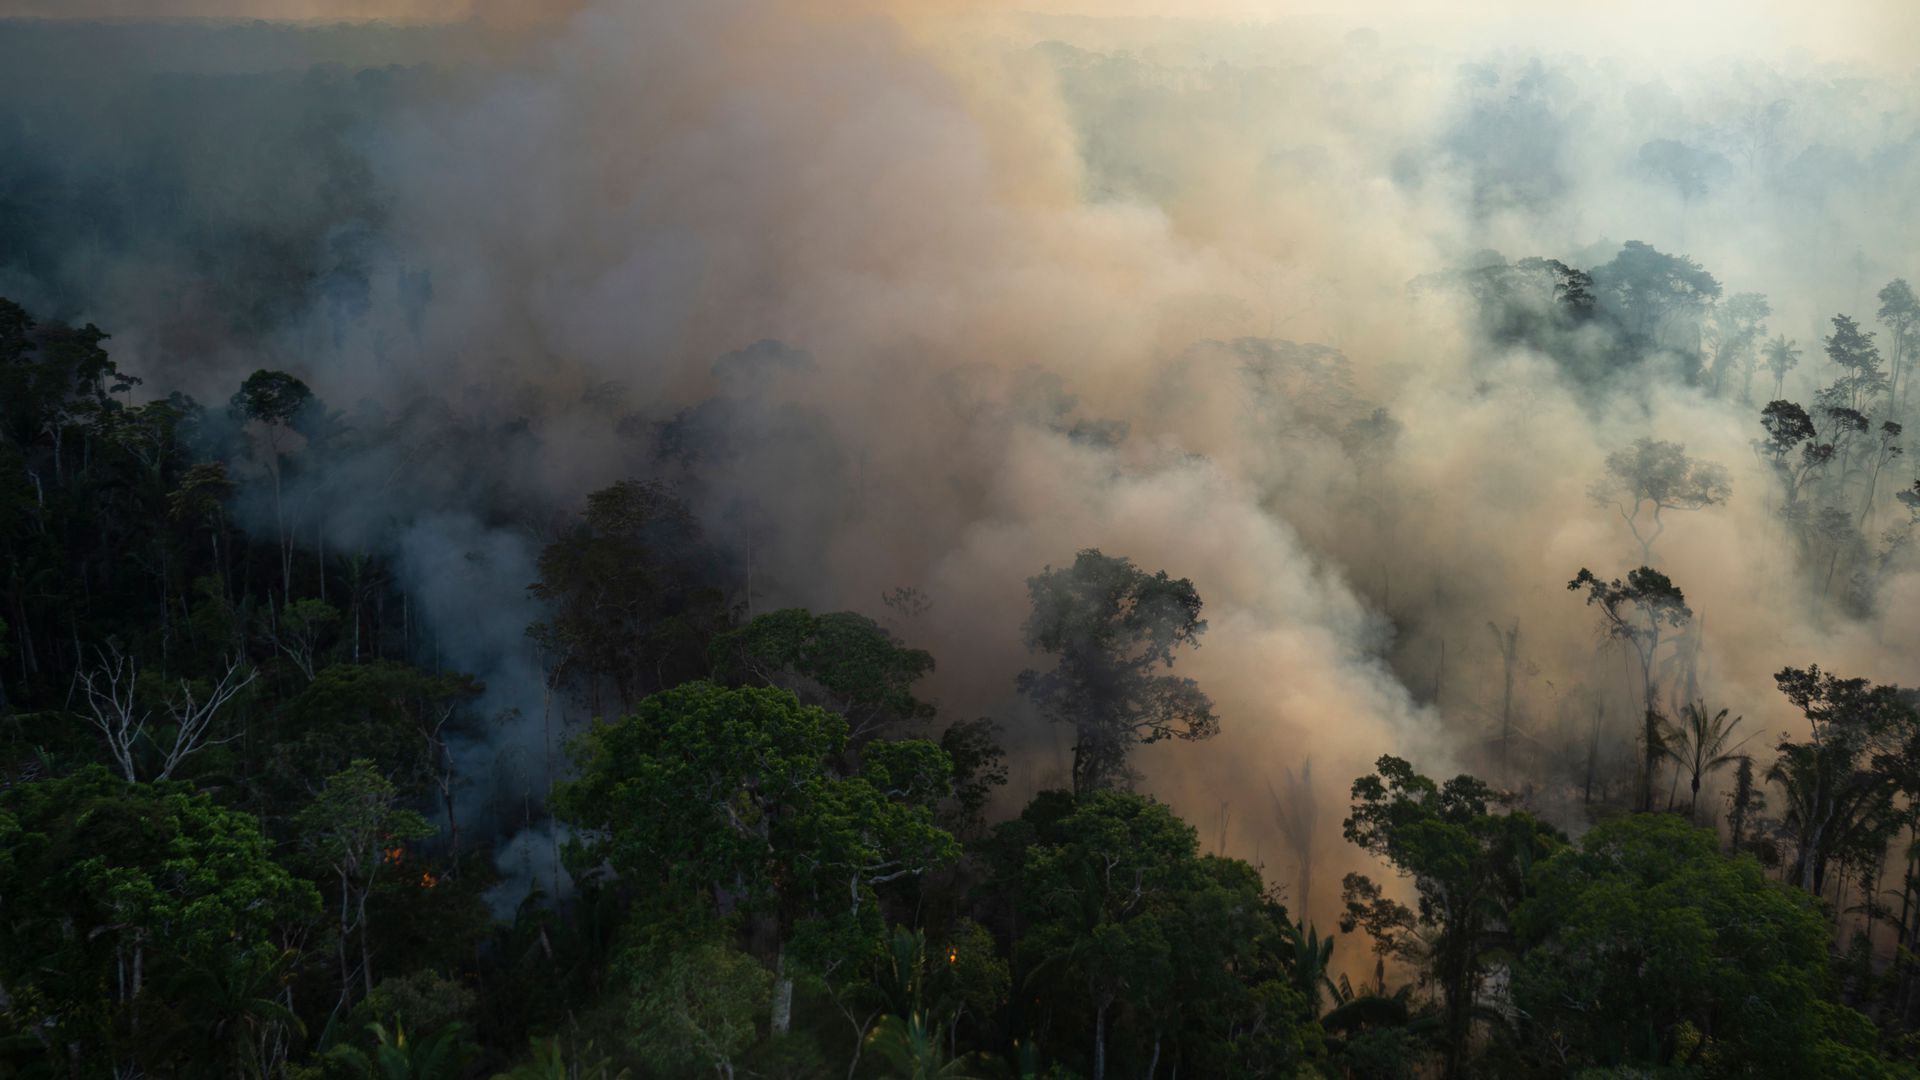 Smoke rising from an illegal fire at the Amazonia rainforest in Brazil on Sept. 15, 2021.